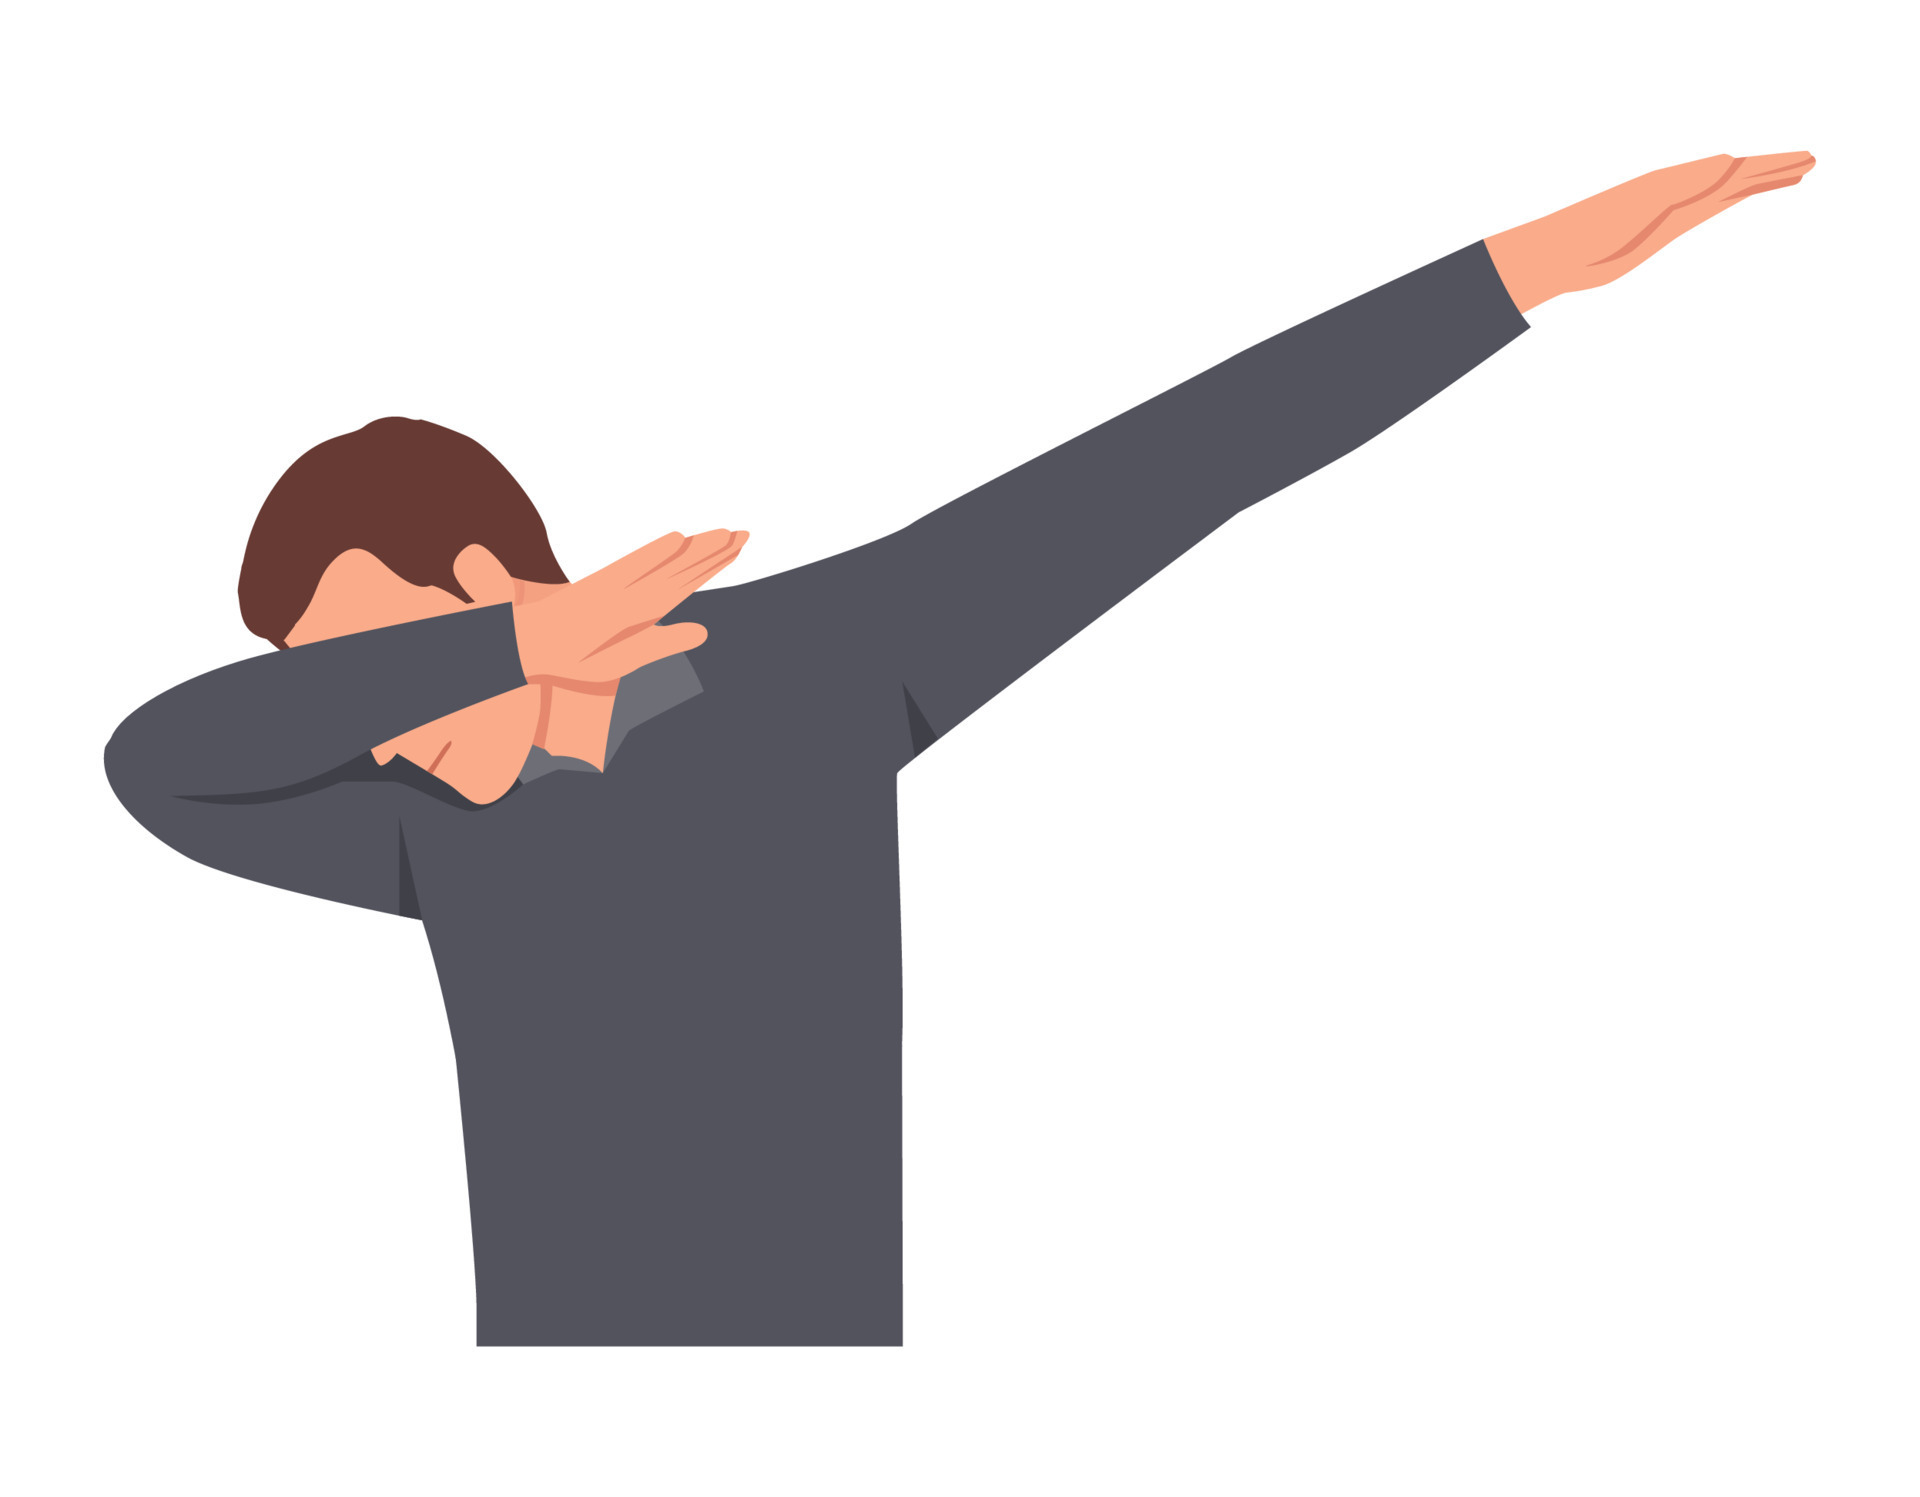 https://static.vecteezy.com/system/resources/previews/016/890/284/original/young-man-dabbing-flat-illustration-isolated-on-white-background-vector.jpg